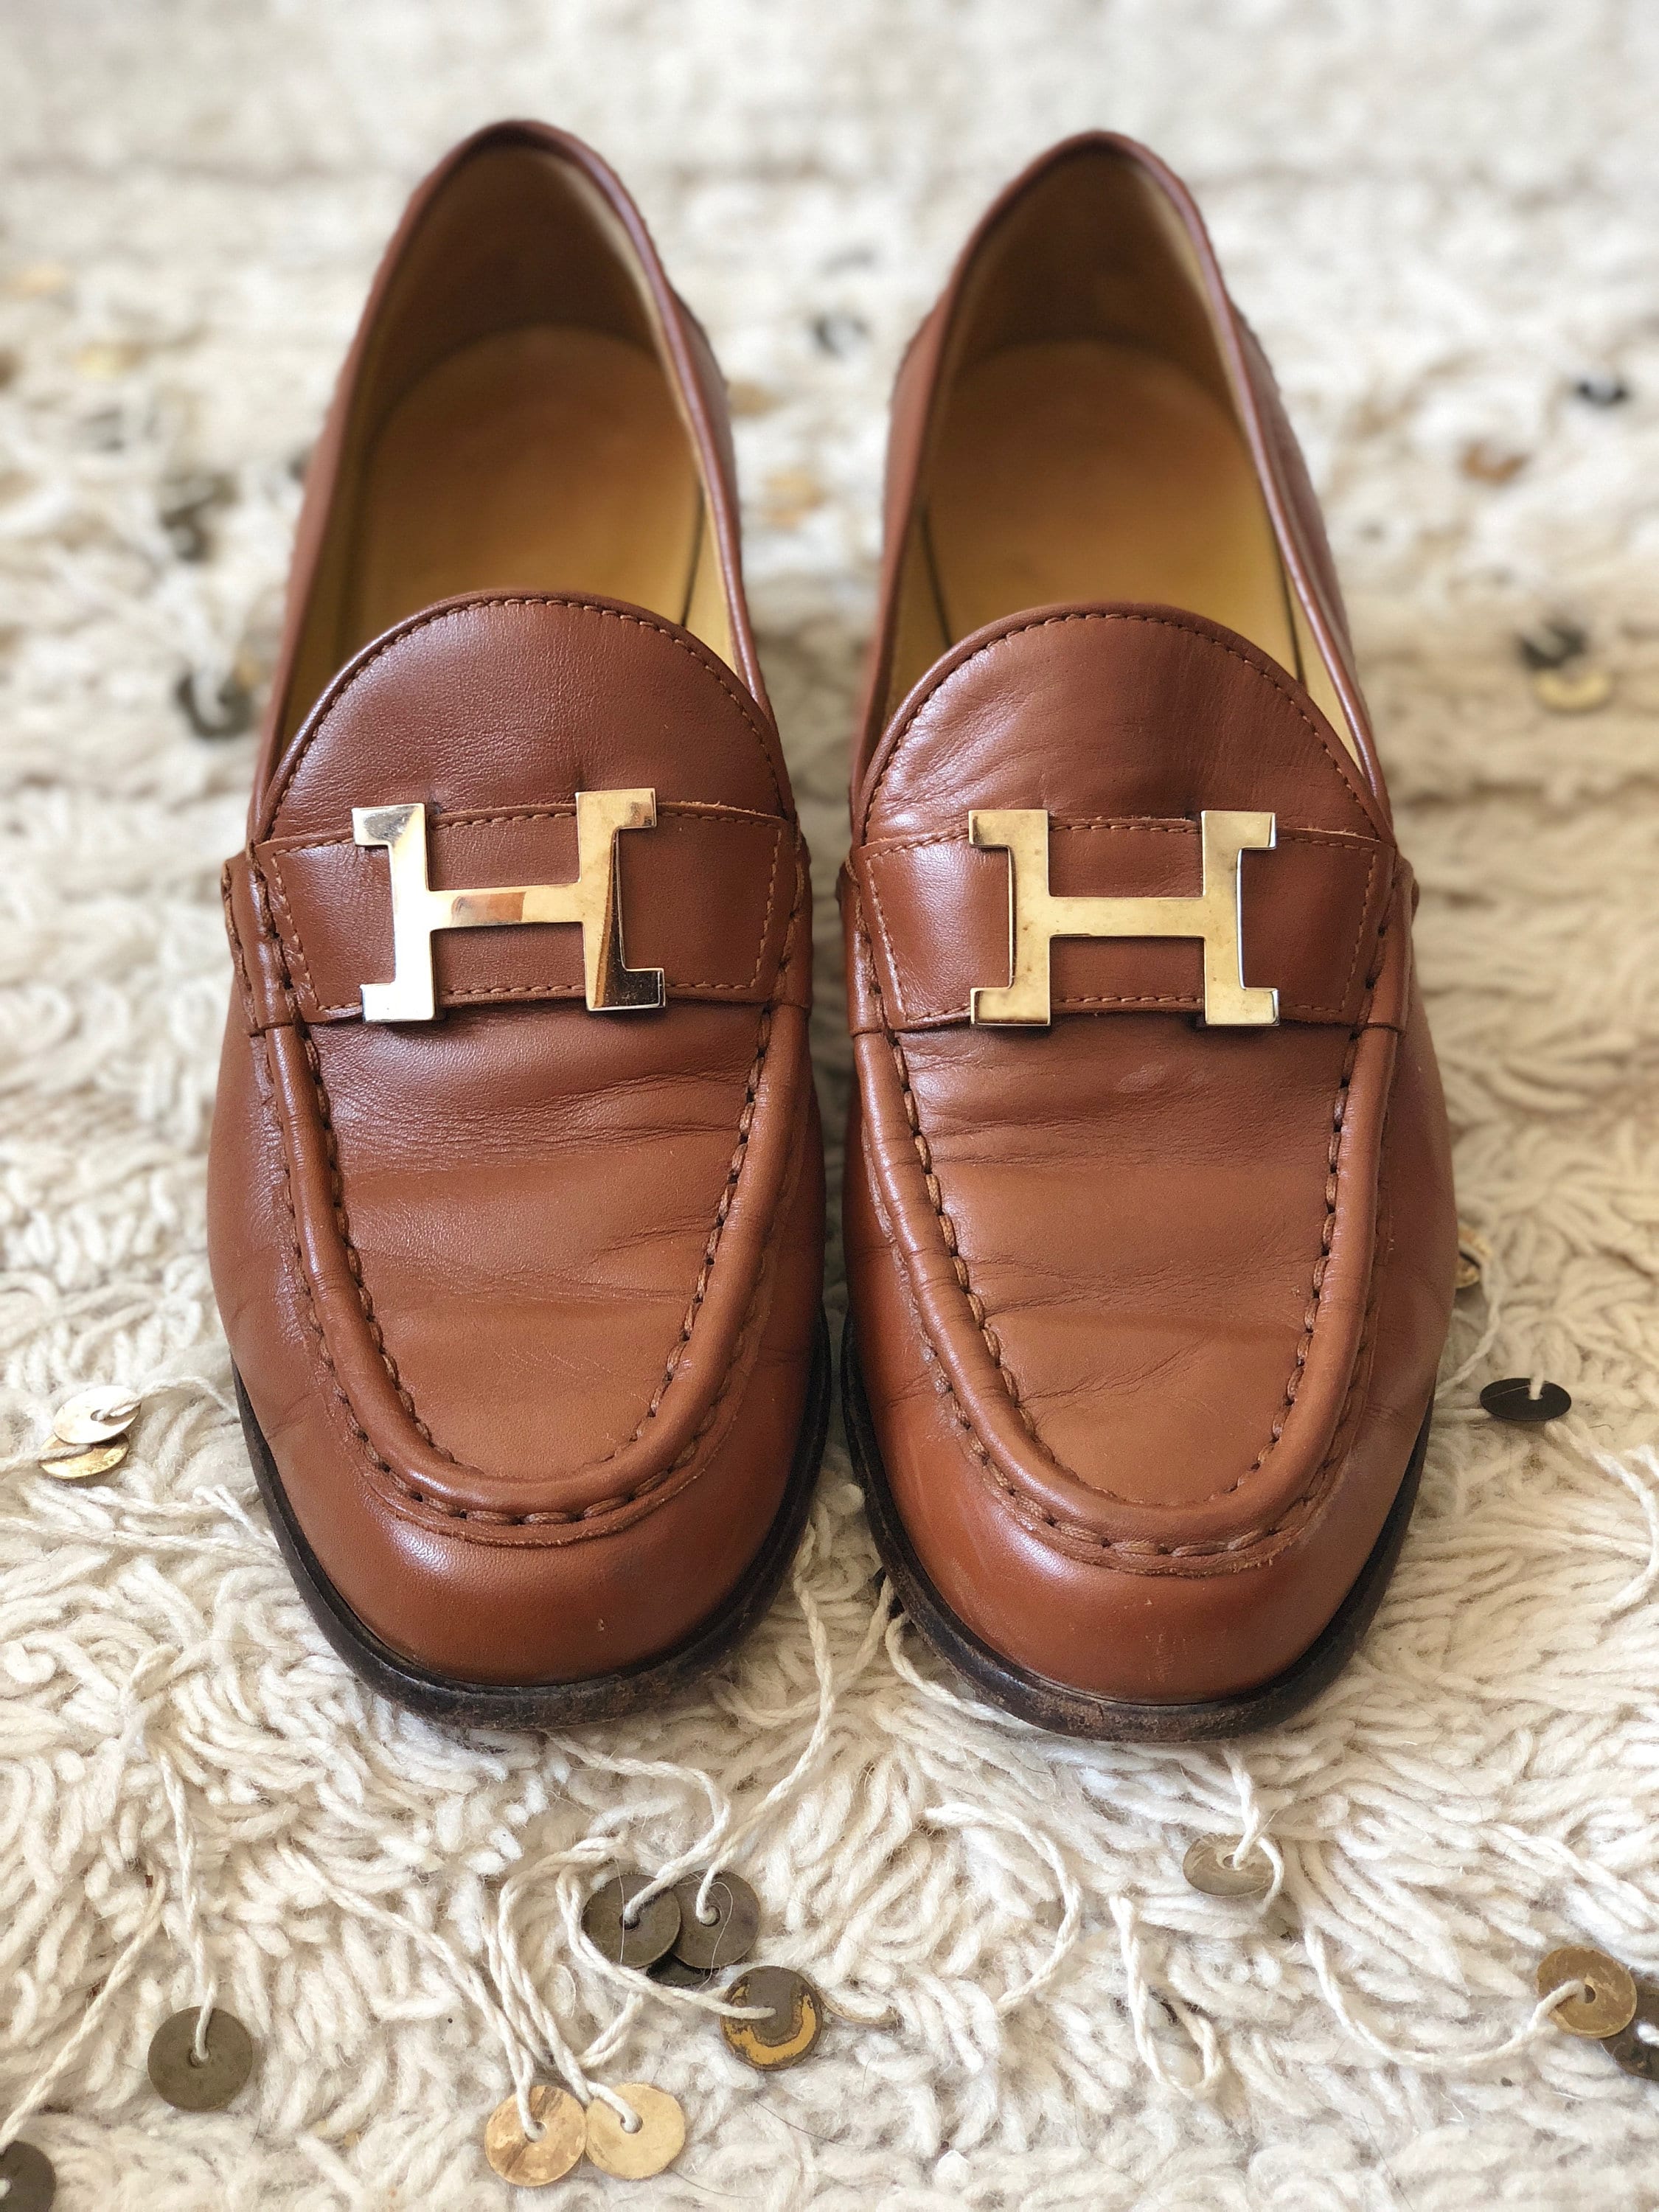 Vintage HERMES H GOLD Logo Brown Cognac Leather Loafers Flats Driving Shoes  Smoking Slippers Ballet Flats eu 36.5 us 6 - 6.5